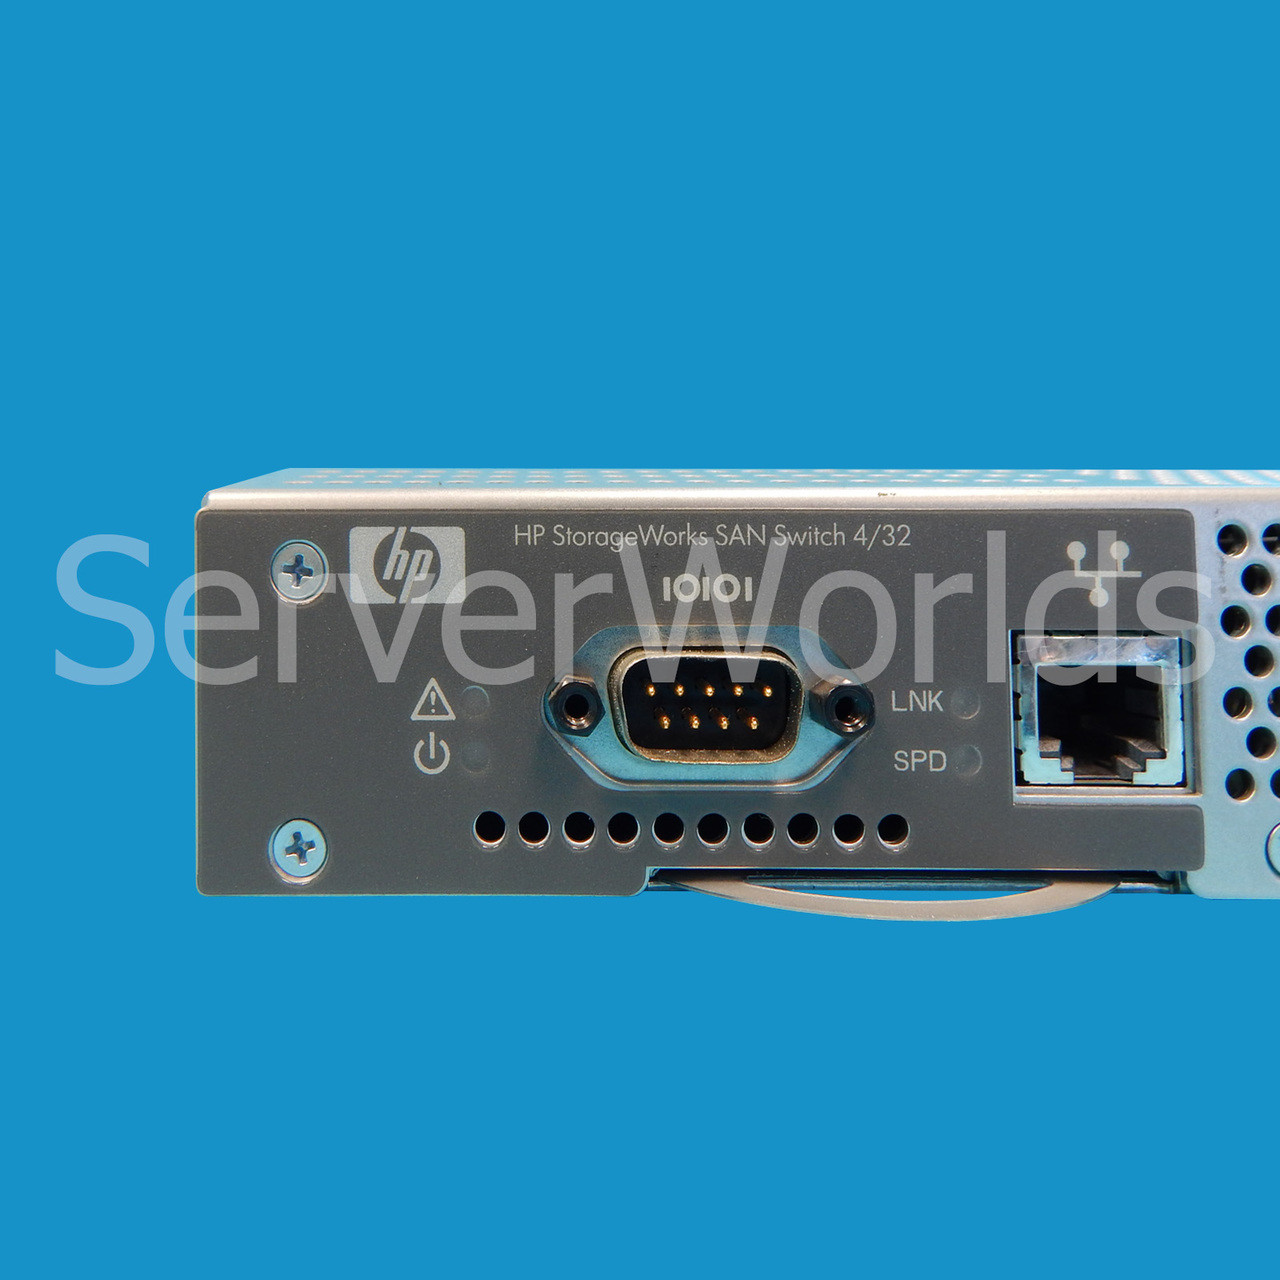 HP A7537A Storageworks 4/32 4GB 32-Port SAN Switch 16 Ports Active